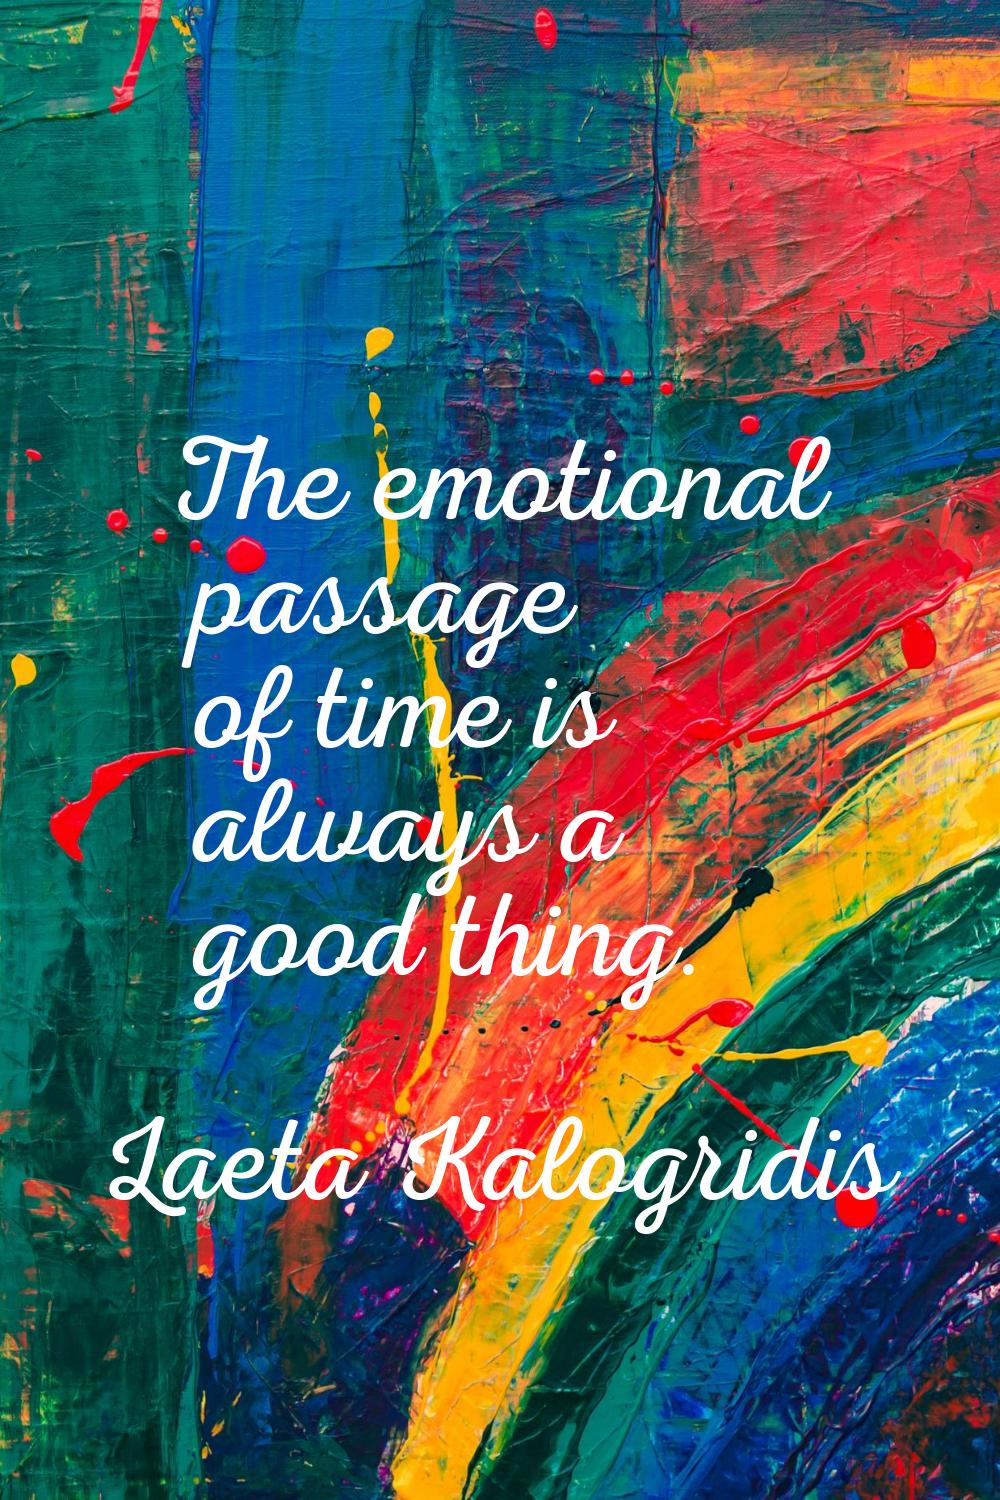 The emotional passage of time is always a good thing.